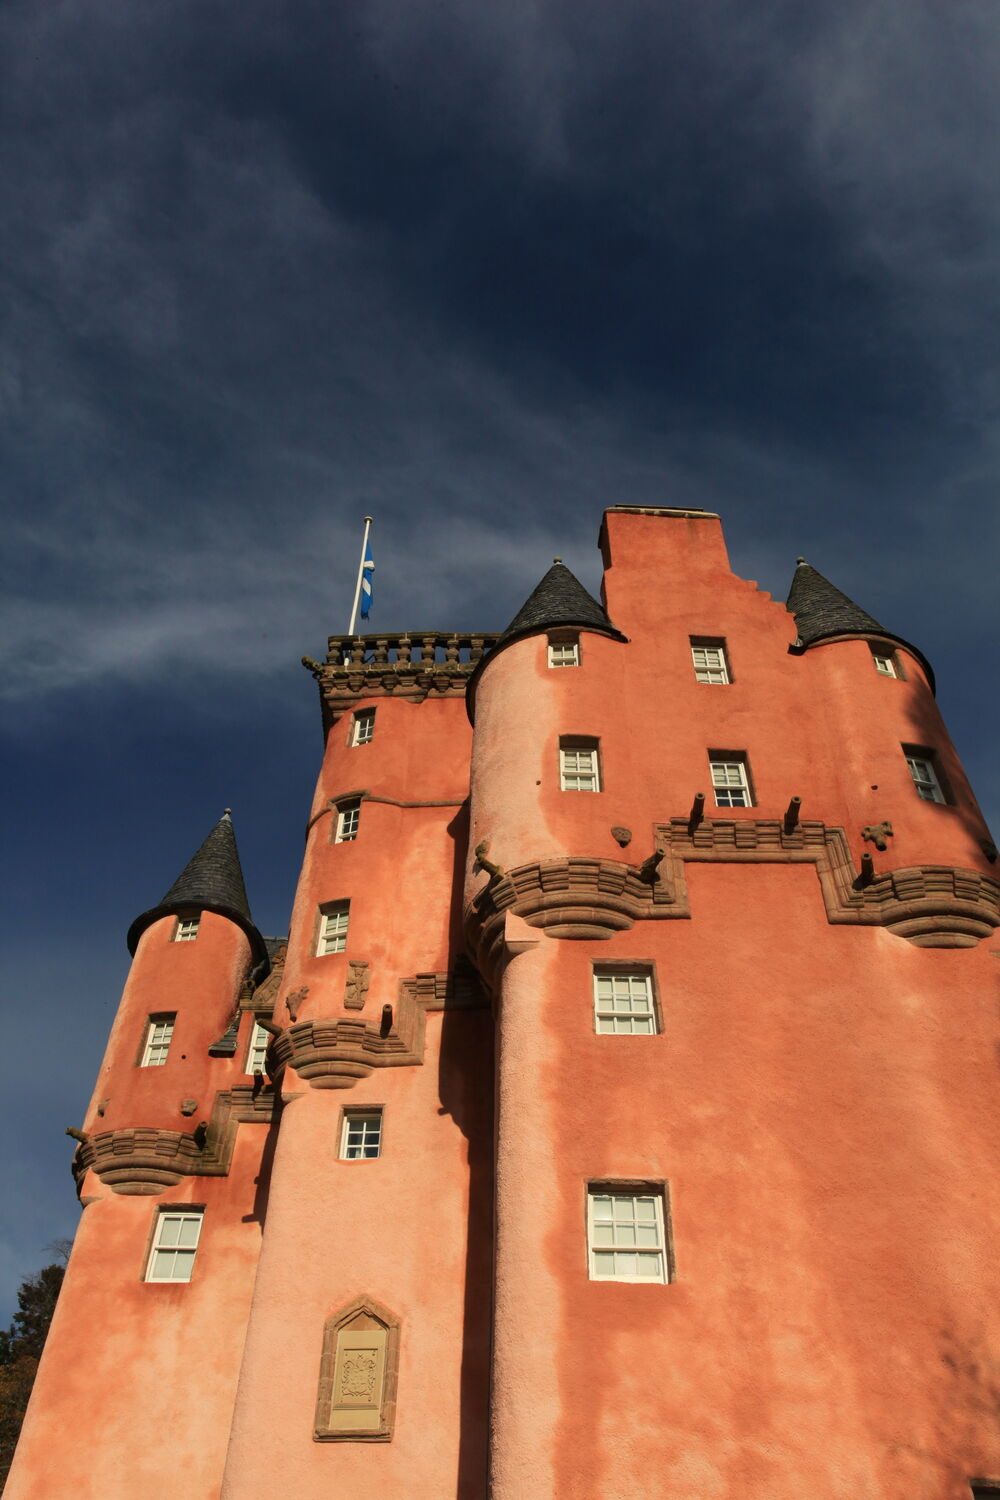 A close-up of Craigievar Castle's iconic pink walls against a blue sky.